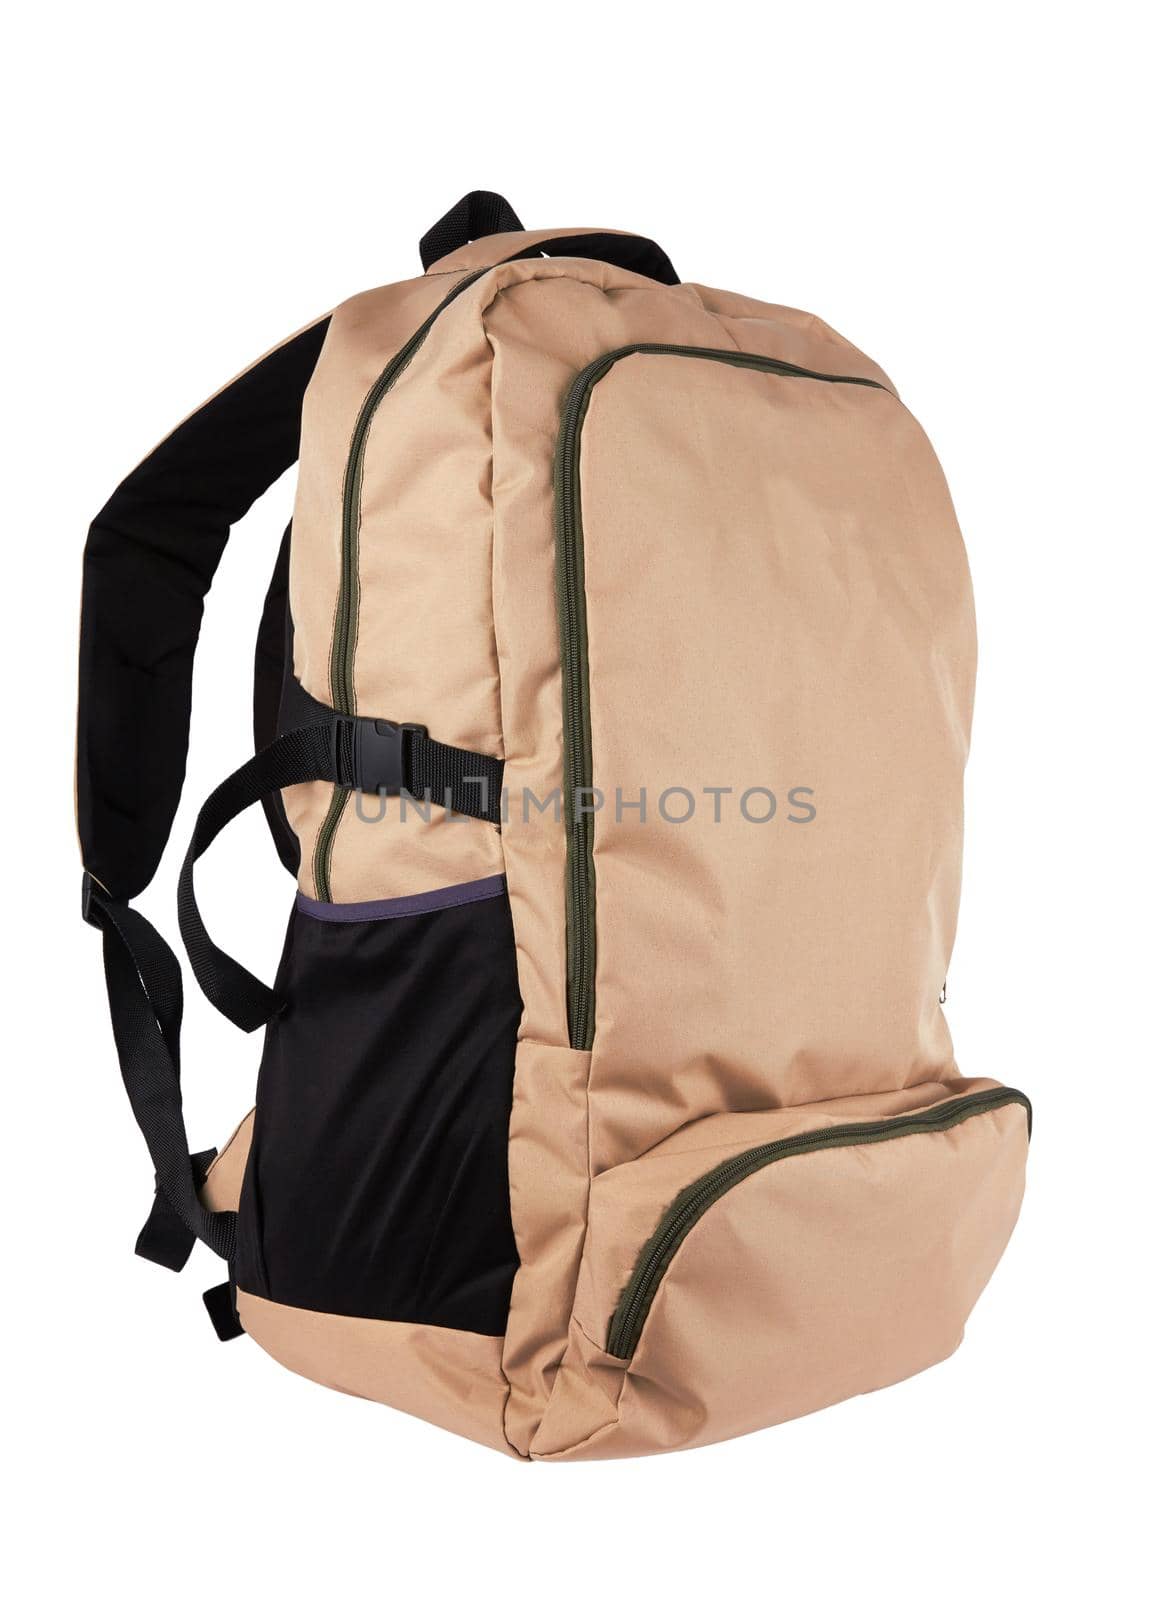 Camouflage backpack on white by pioneer111